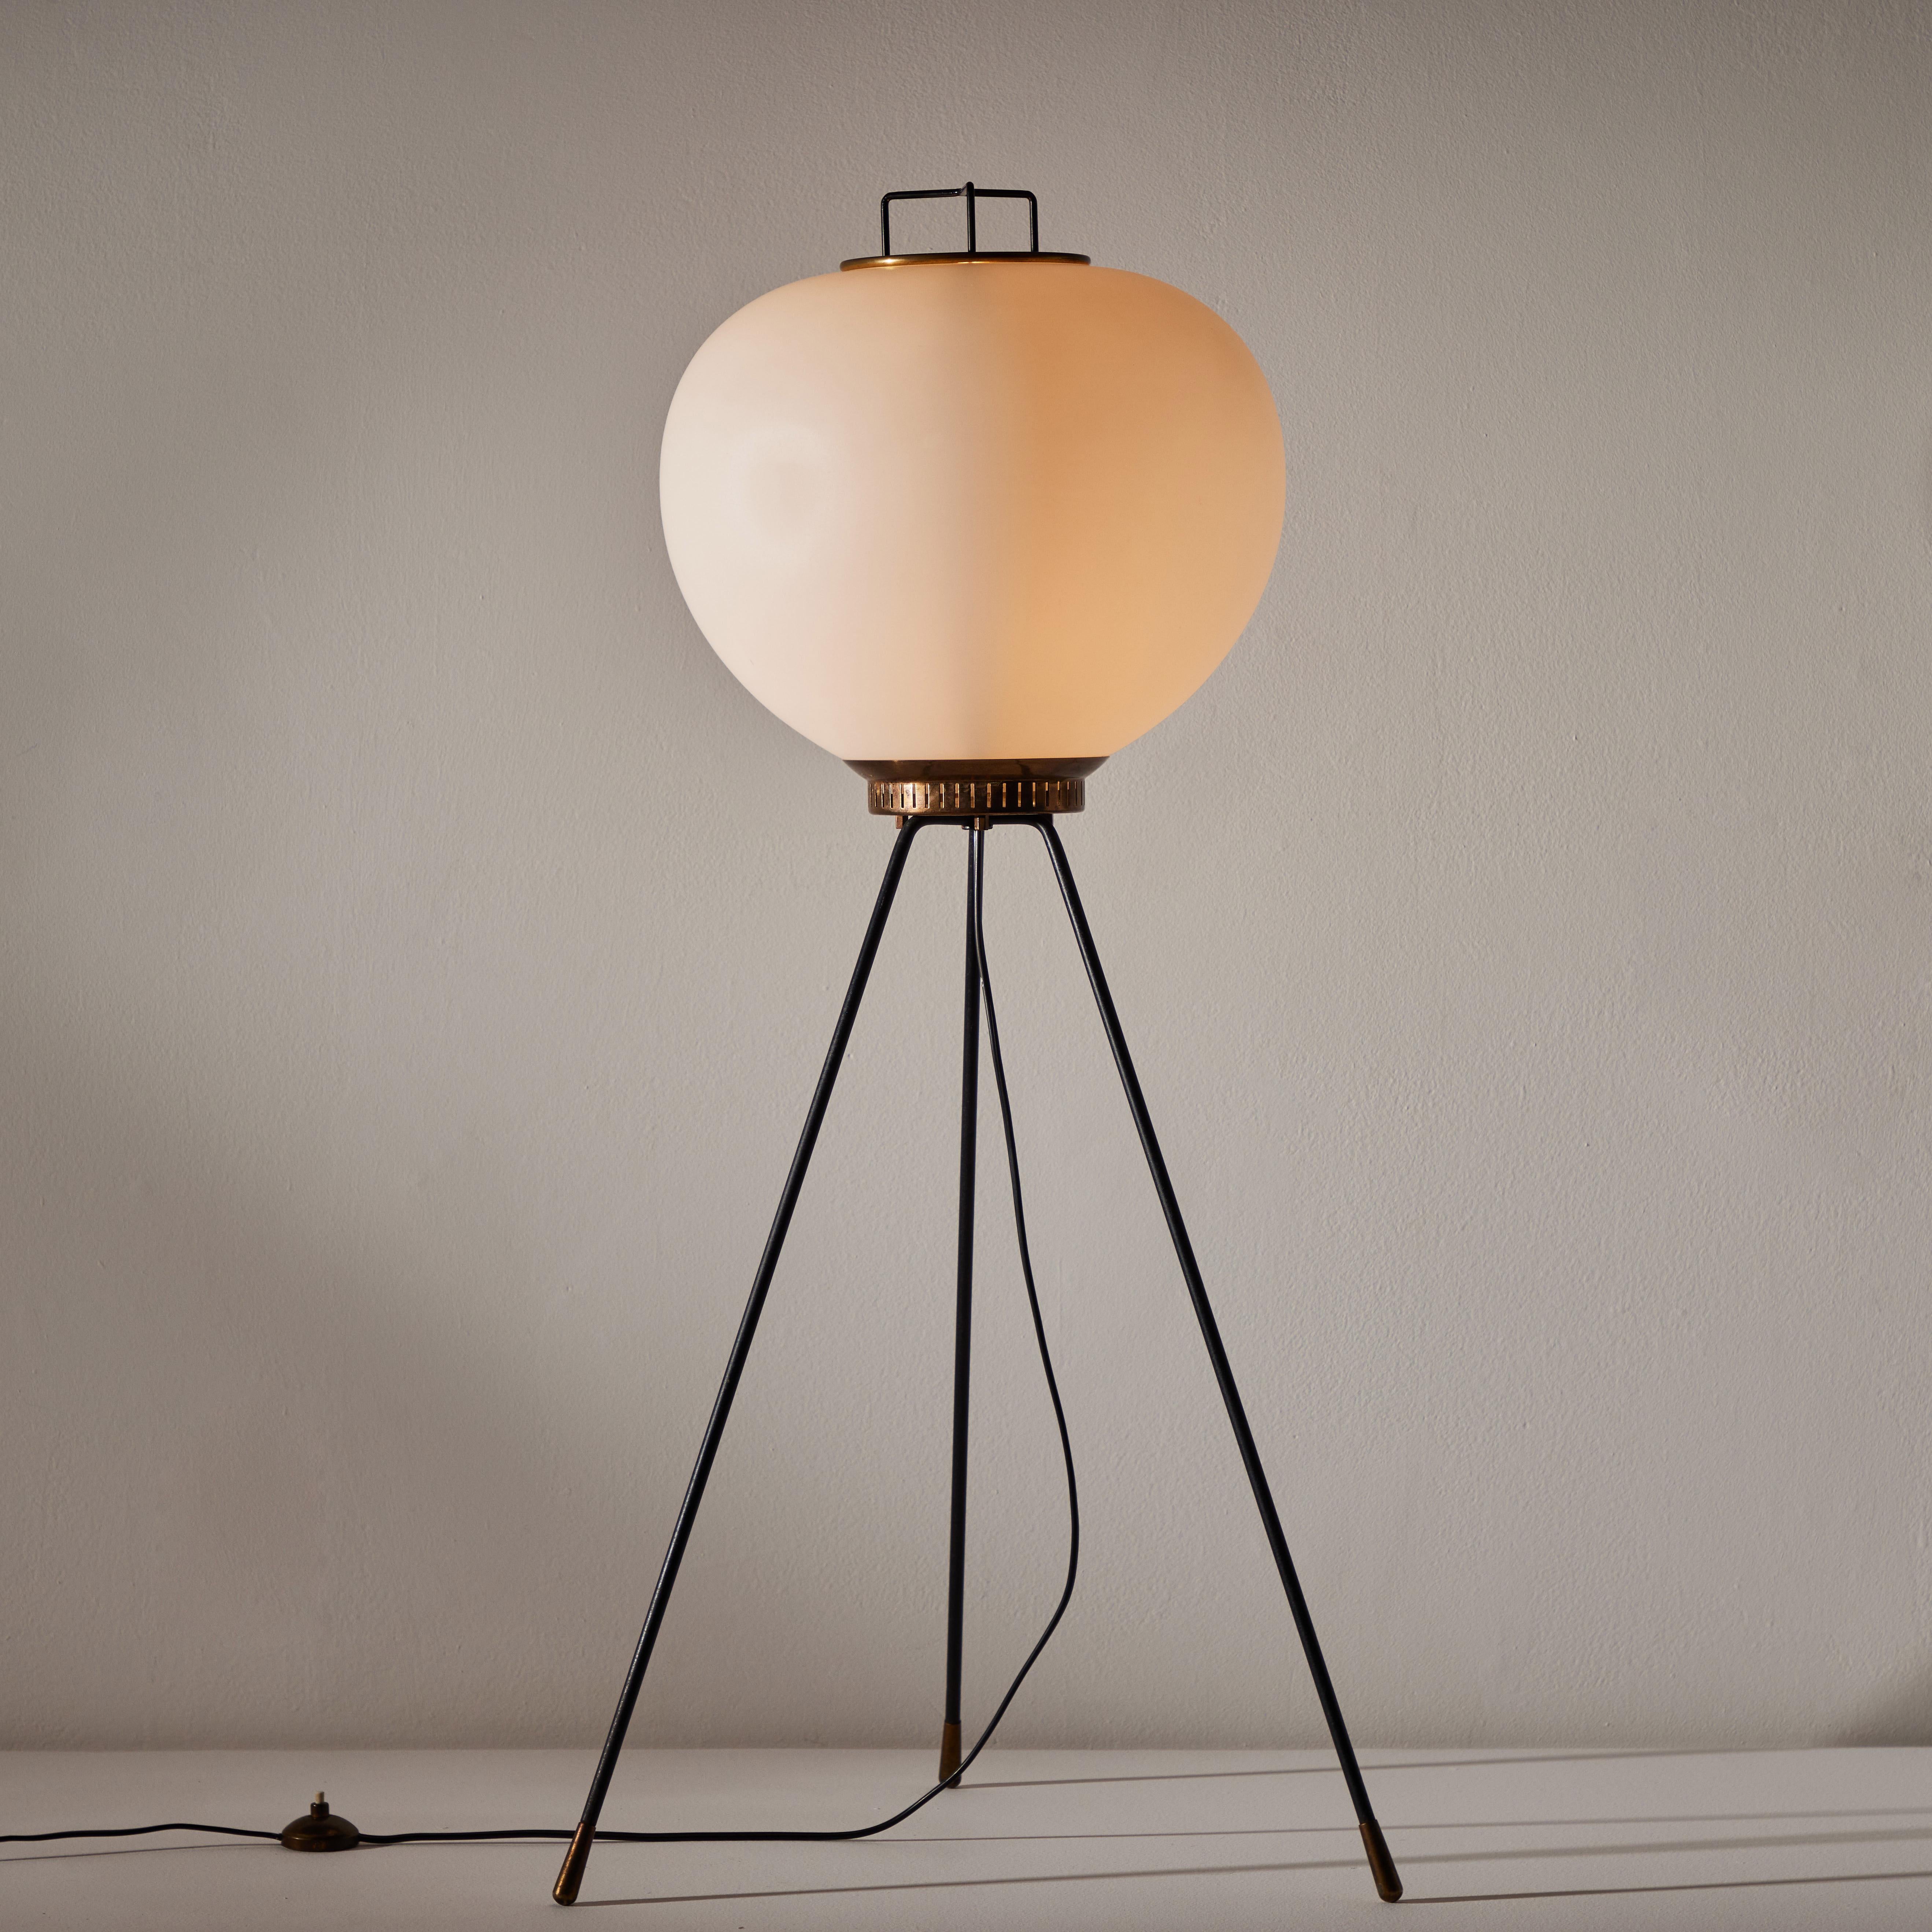 Floor Lamp by Stilnovo. Manufactured in Italy, circa 1950s. Brushed satin glass diffuser, enameled metal, brass. Original European cord. We recommend one E27 75w maximum bulb. Bulb provided as a one time courtesy.